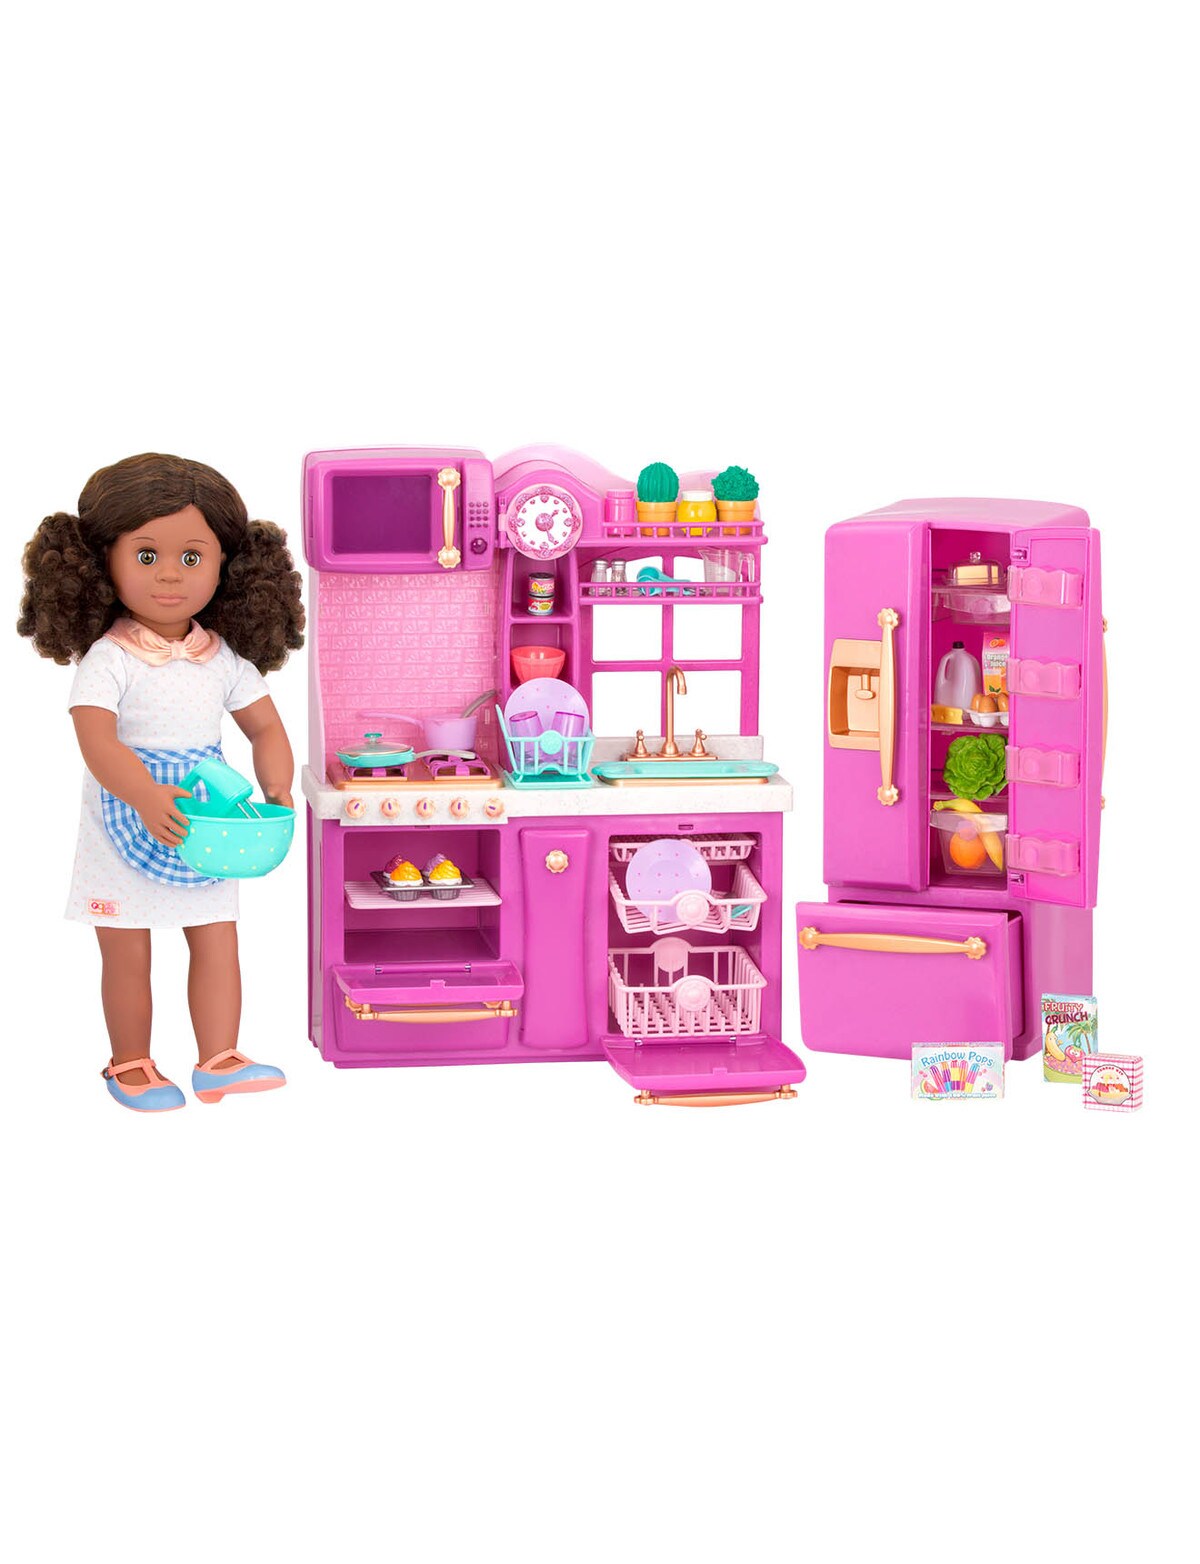 Our generation- Pet Store Set- Toys, Accessories Playsets for 18